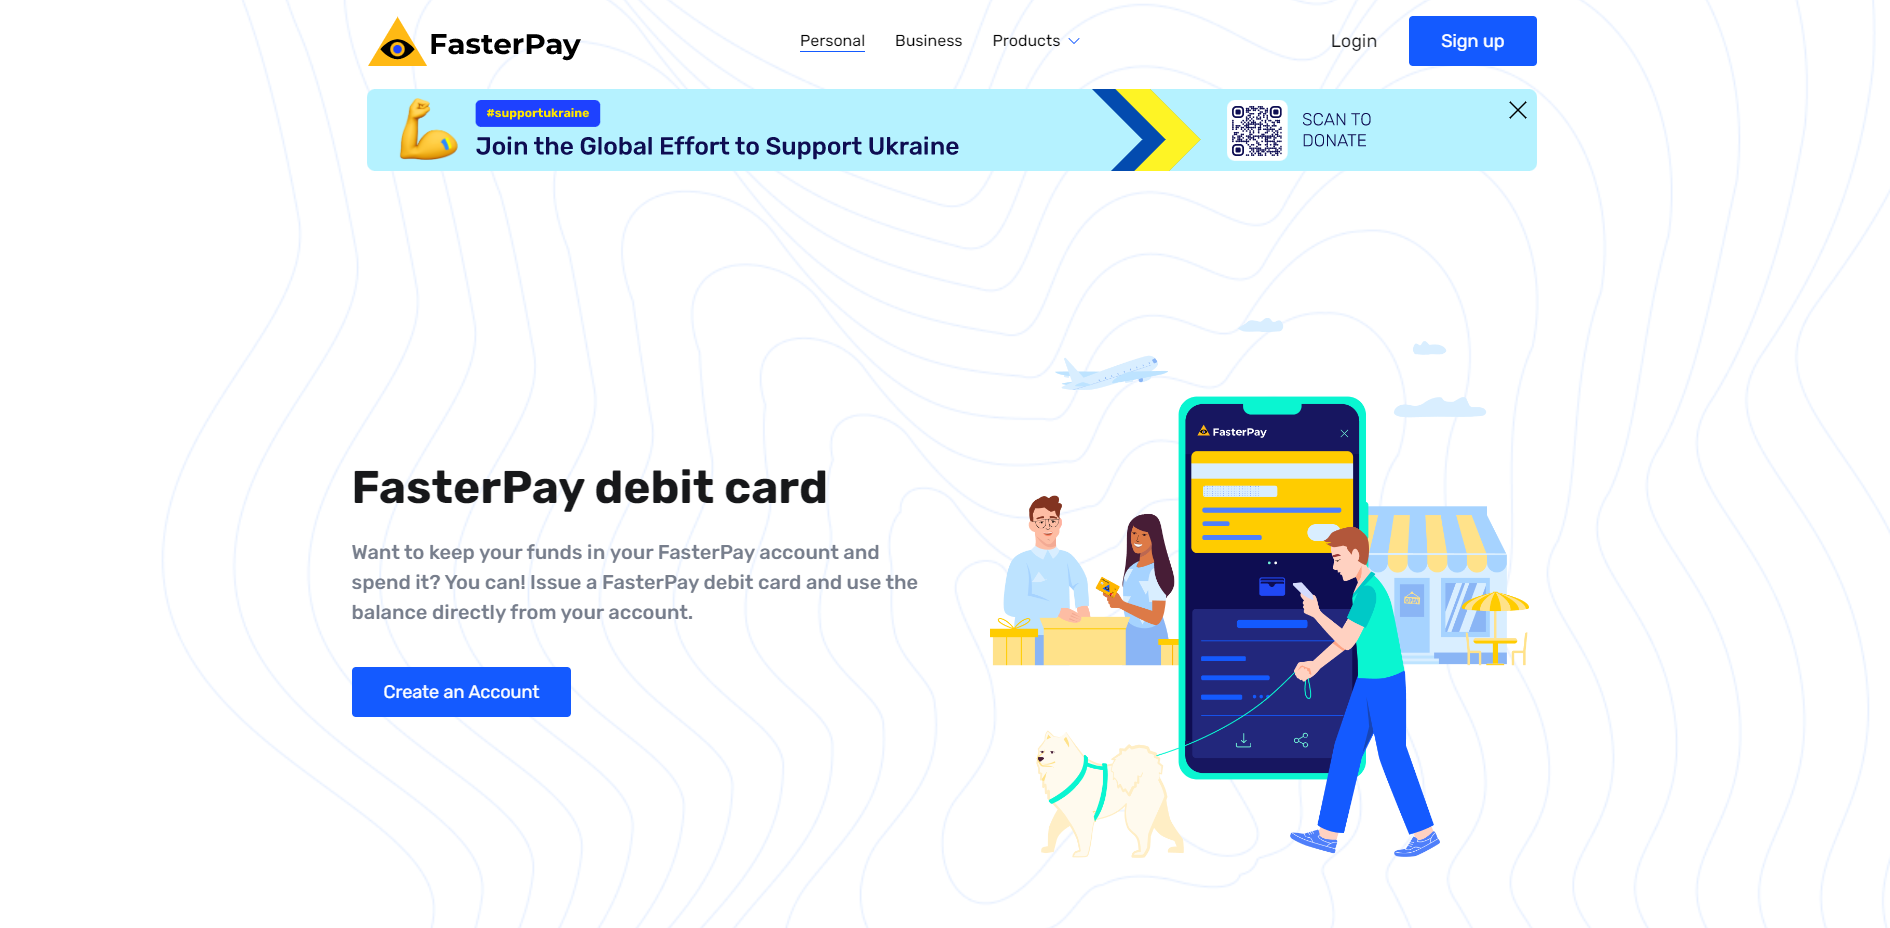 FasterPay